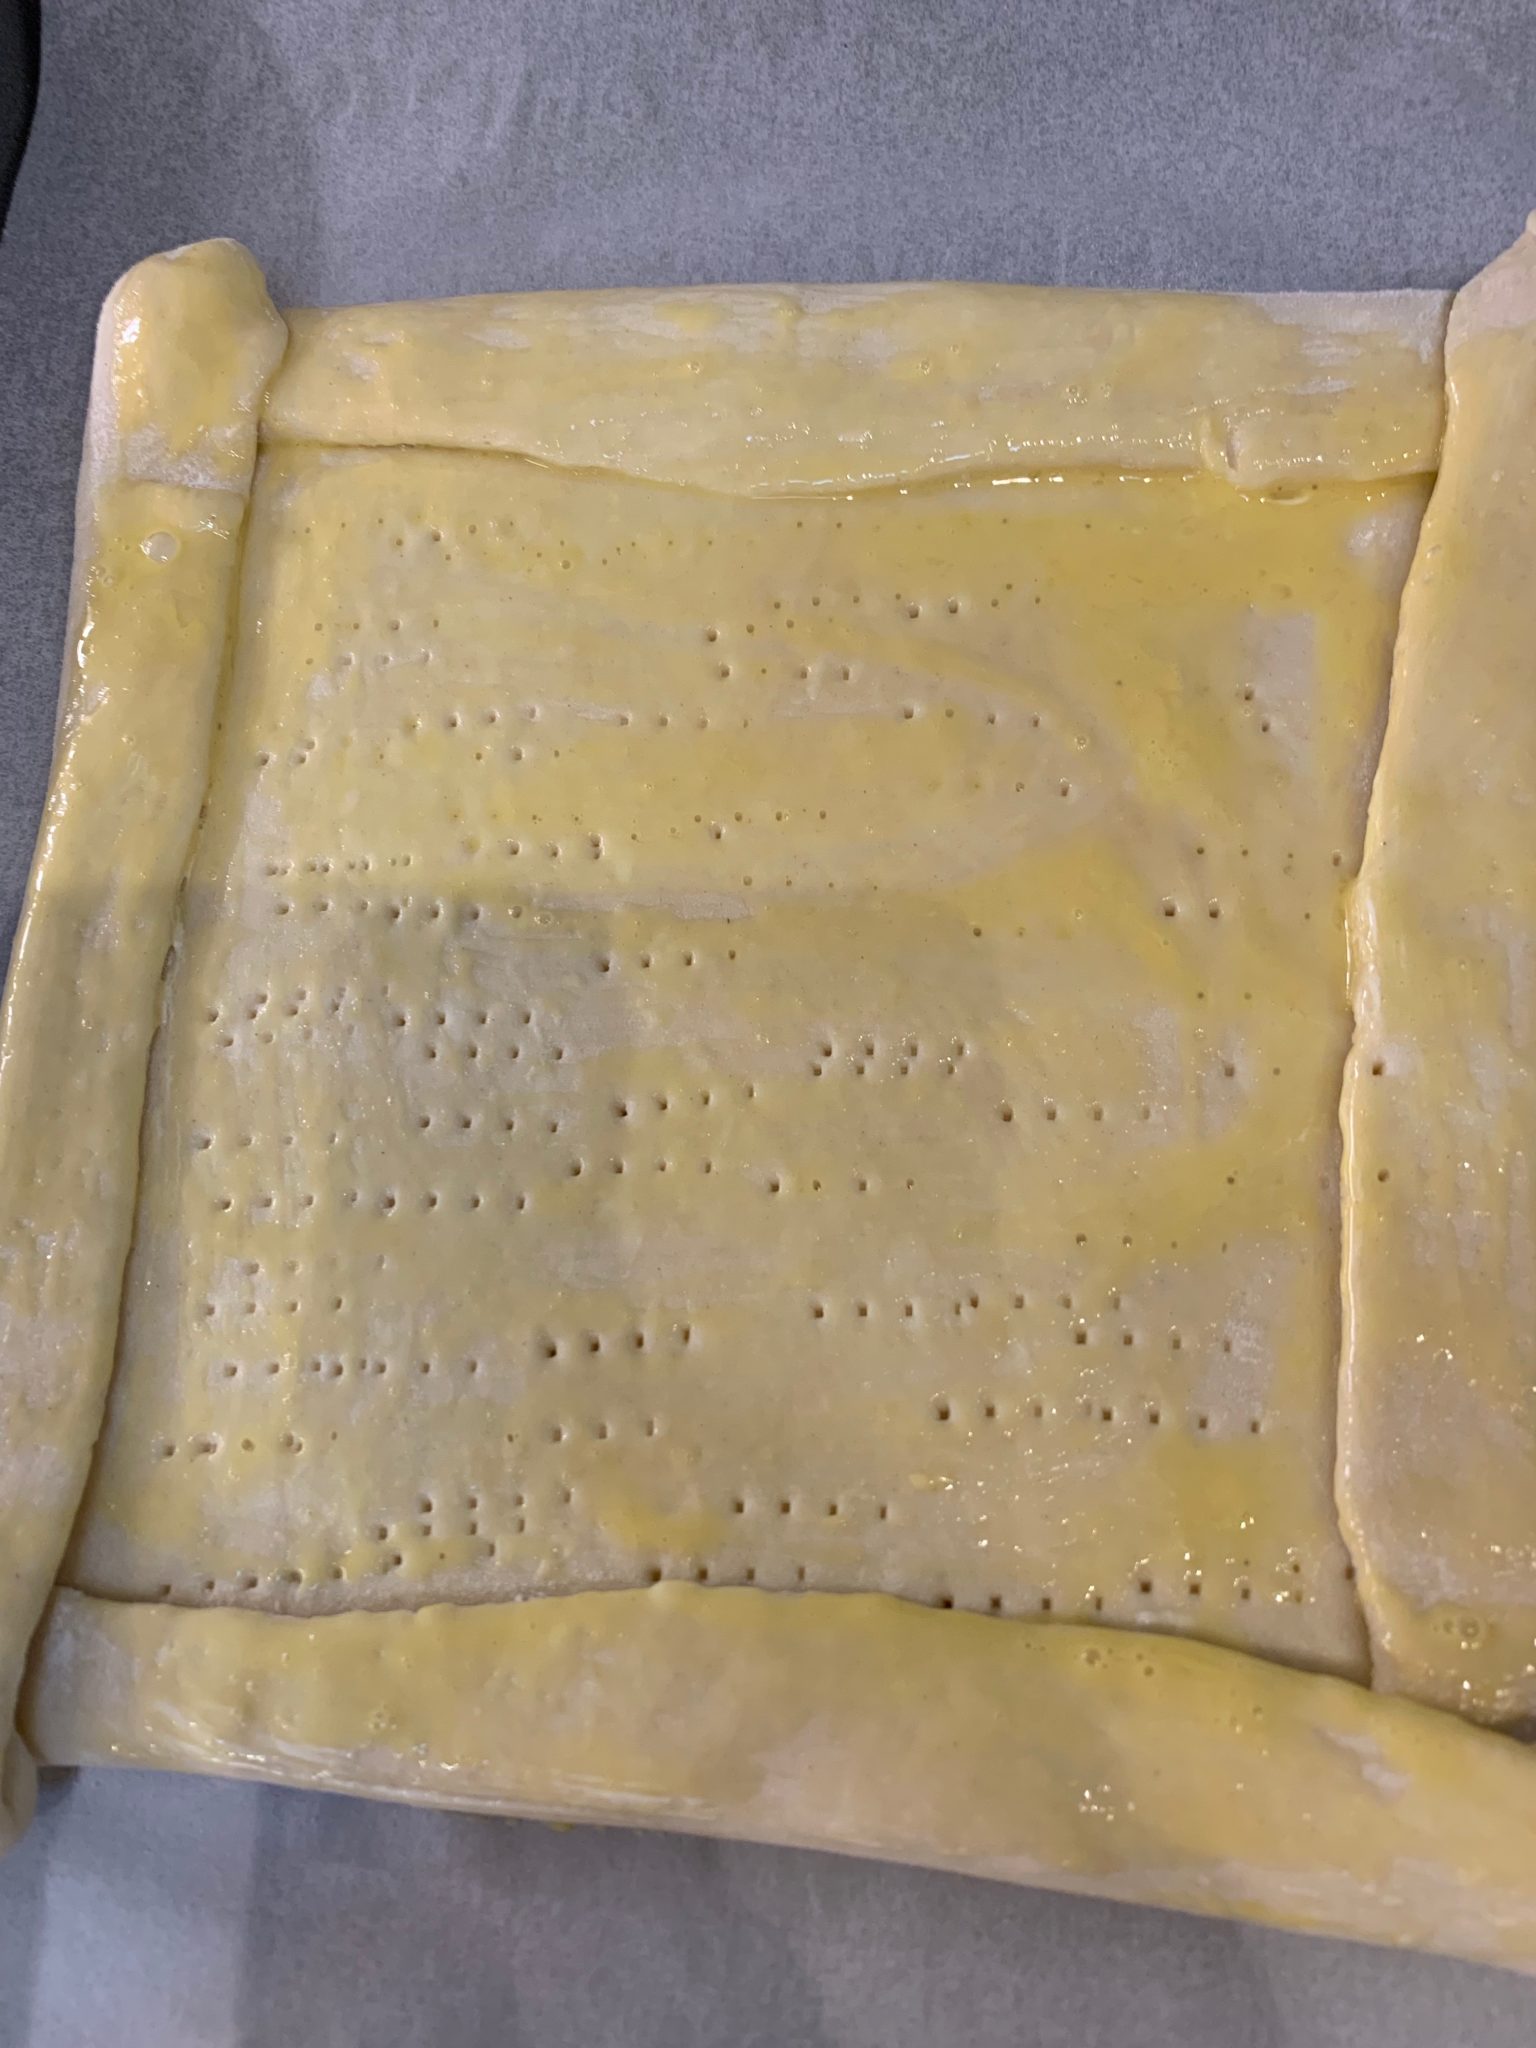 Puff pastry tart brushed with egg wash